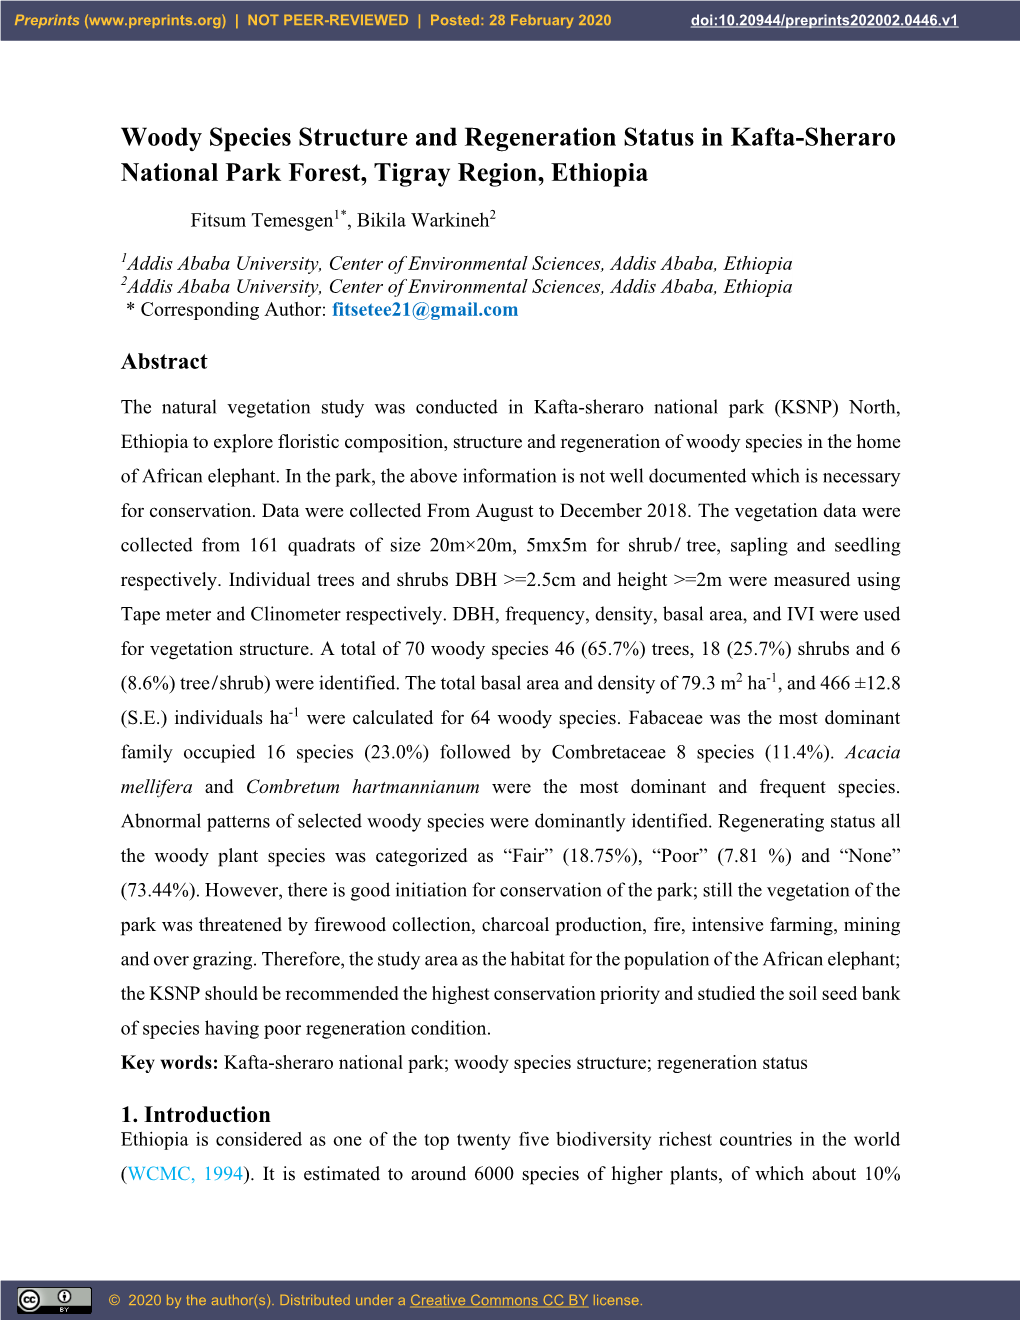 Woody Species Structure and Regeneration Status in Kafta-Sheraro National Park Forest, Tigray Region, Ethiopia